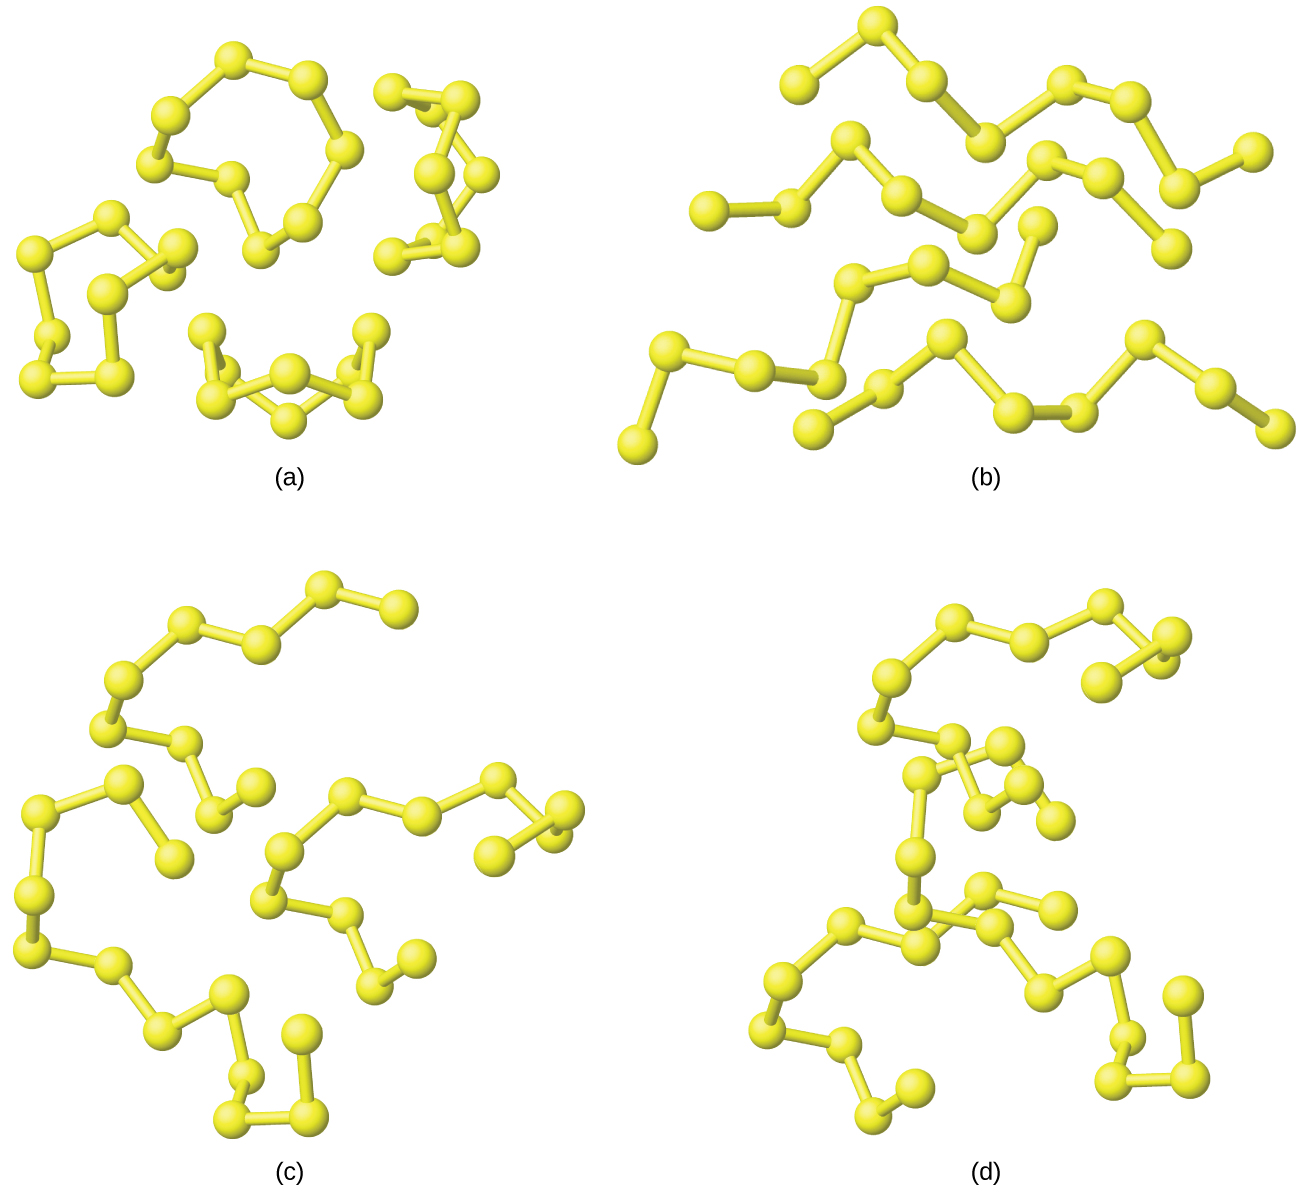 Four diagrams are shown and labeled “a,” “b,” “c,” and “d.” Diagram a shows four ring structures that are each made up of eight single bonded atoms. Diagram b shows four chains of eight atoms. Diagram c shows three chains of atoms, one composed by nine atoms, one by twelve atoms and one by eleven atoms. Diagram d shows the same three chains, but this time they are much closer together and slightly intertwined.